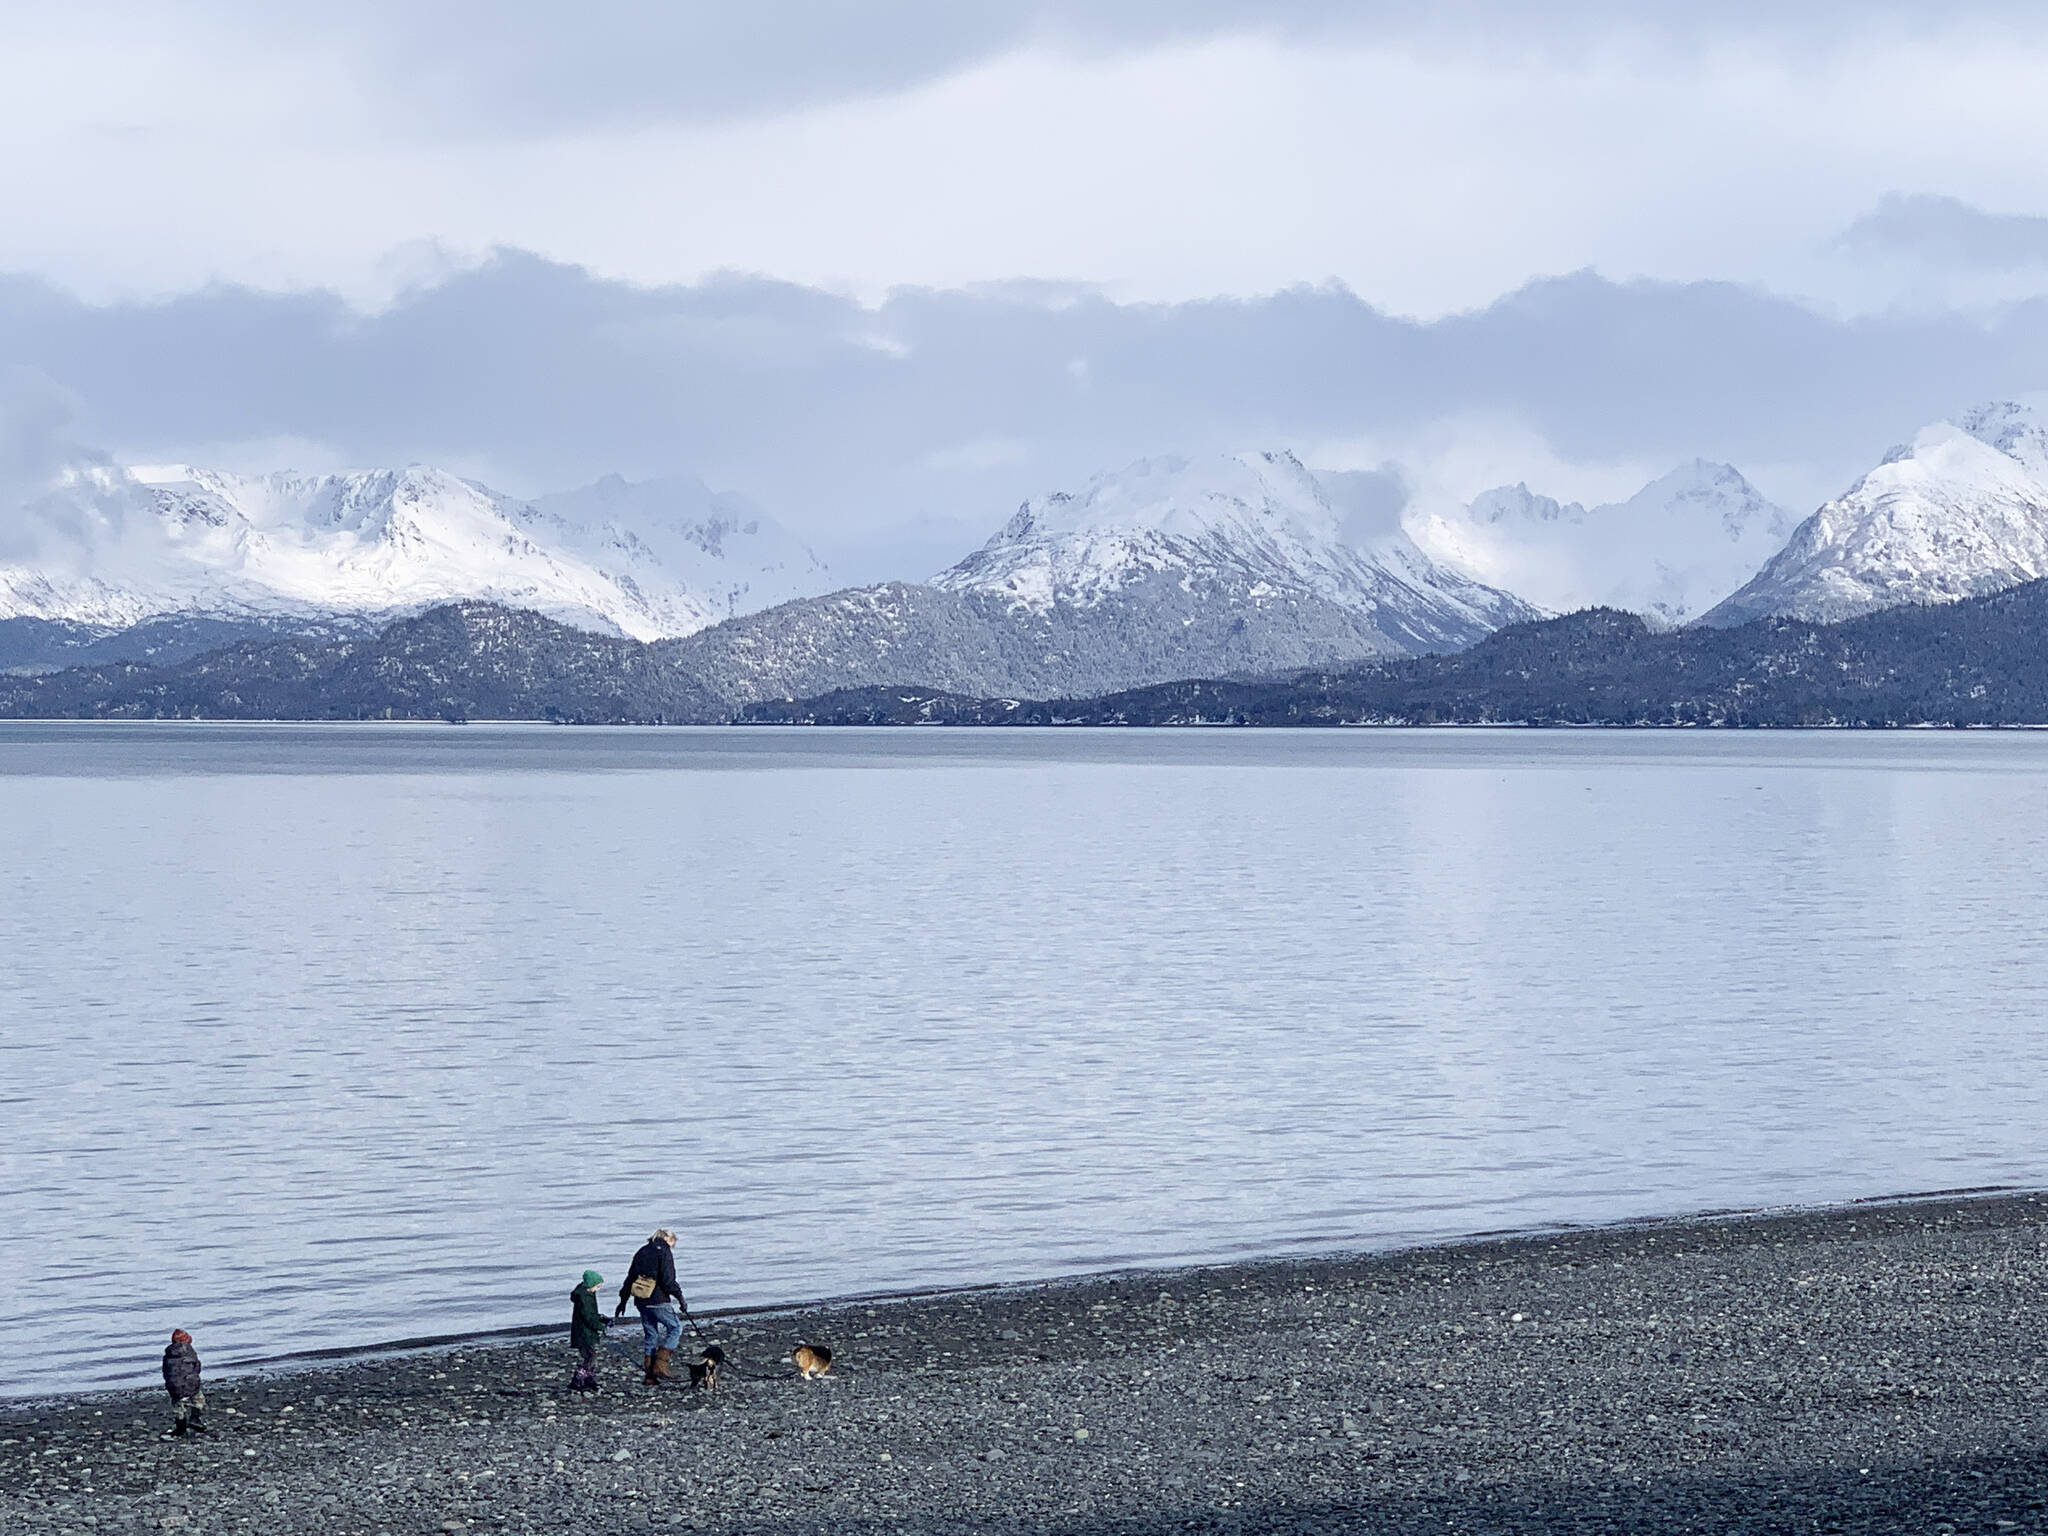 A family and their dogs enjoy a sunny day on the Homer Spit on Wednesday<ins>, March 15, 2023 in Homer, Alaska</ins>. Photo by Christina Whiting